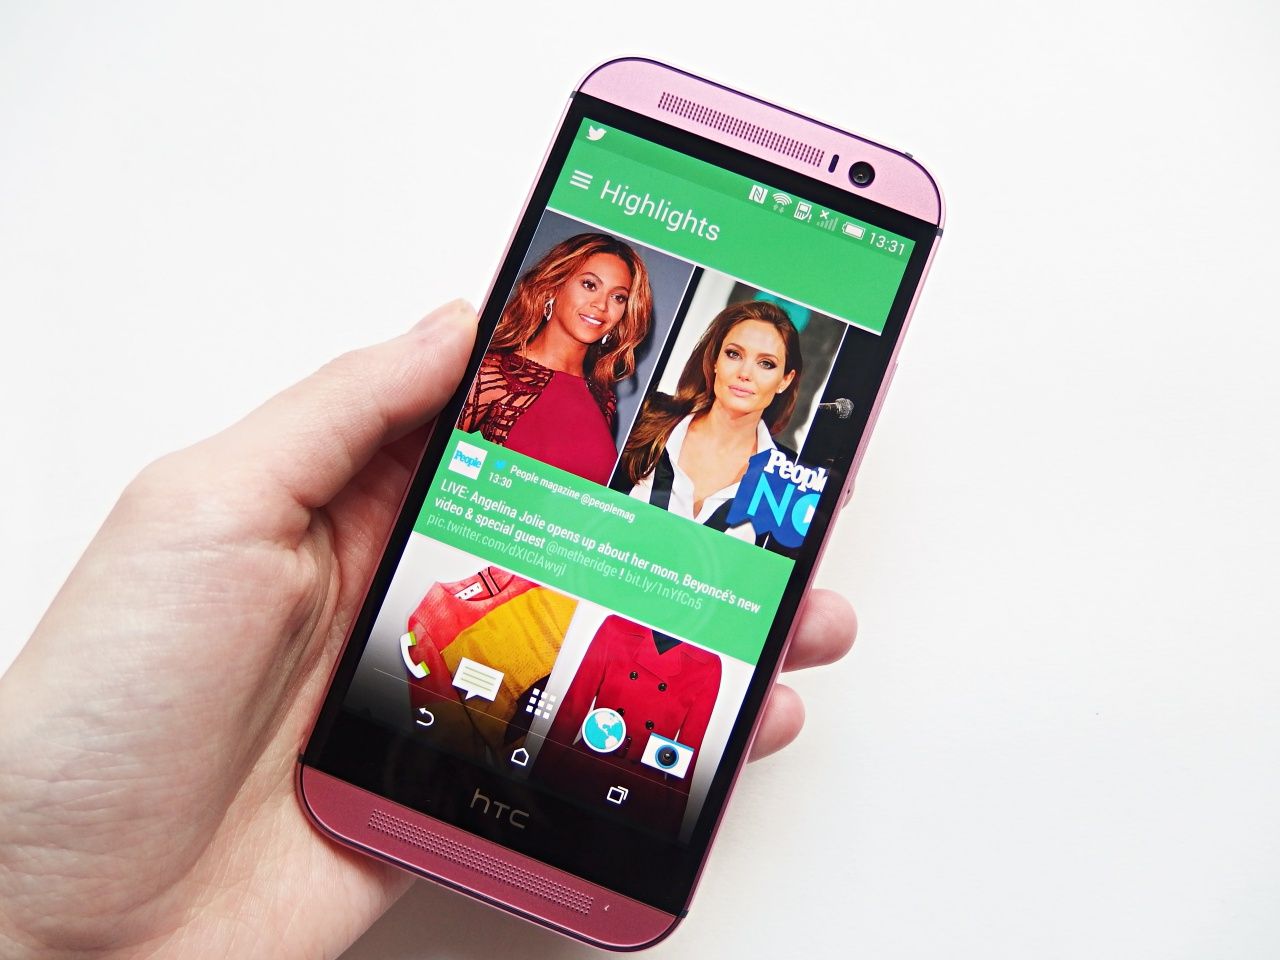 HTC One M8 Pink Review